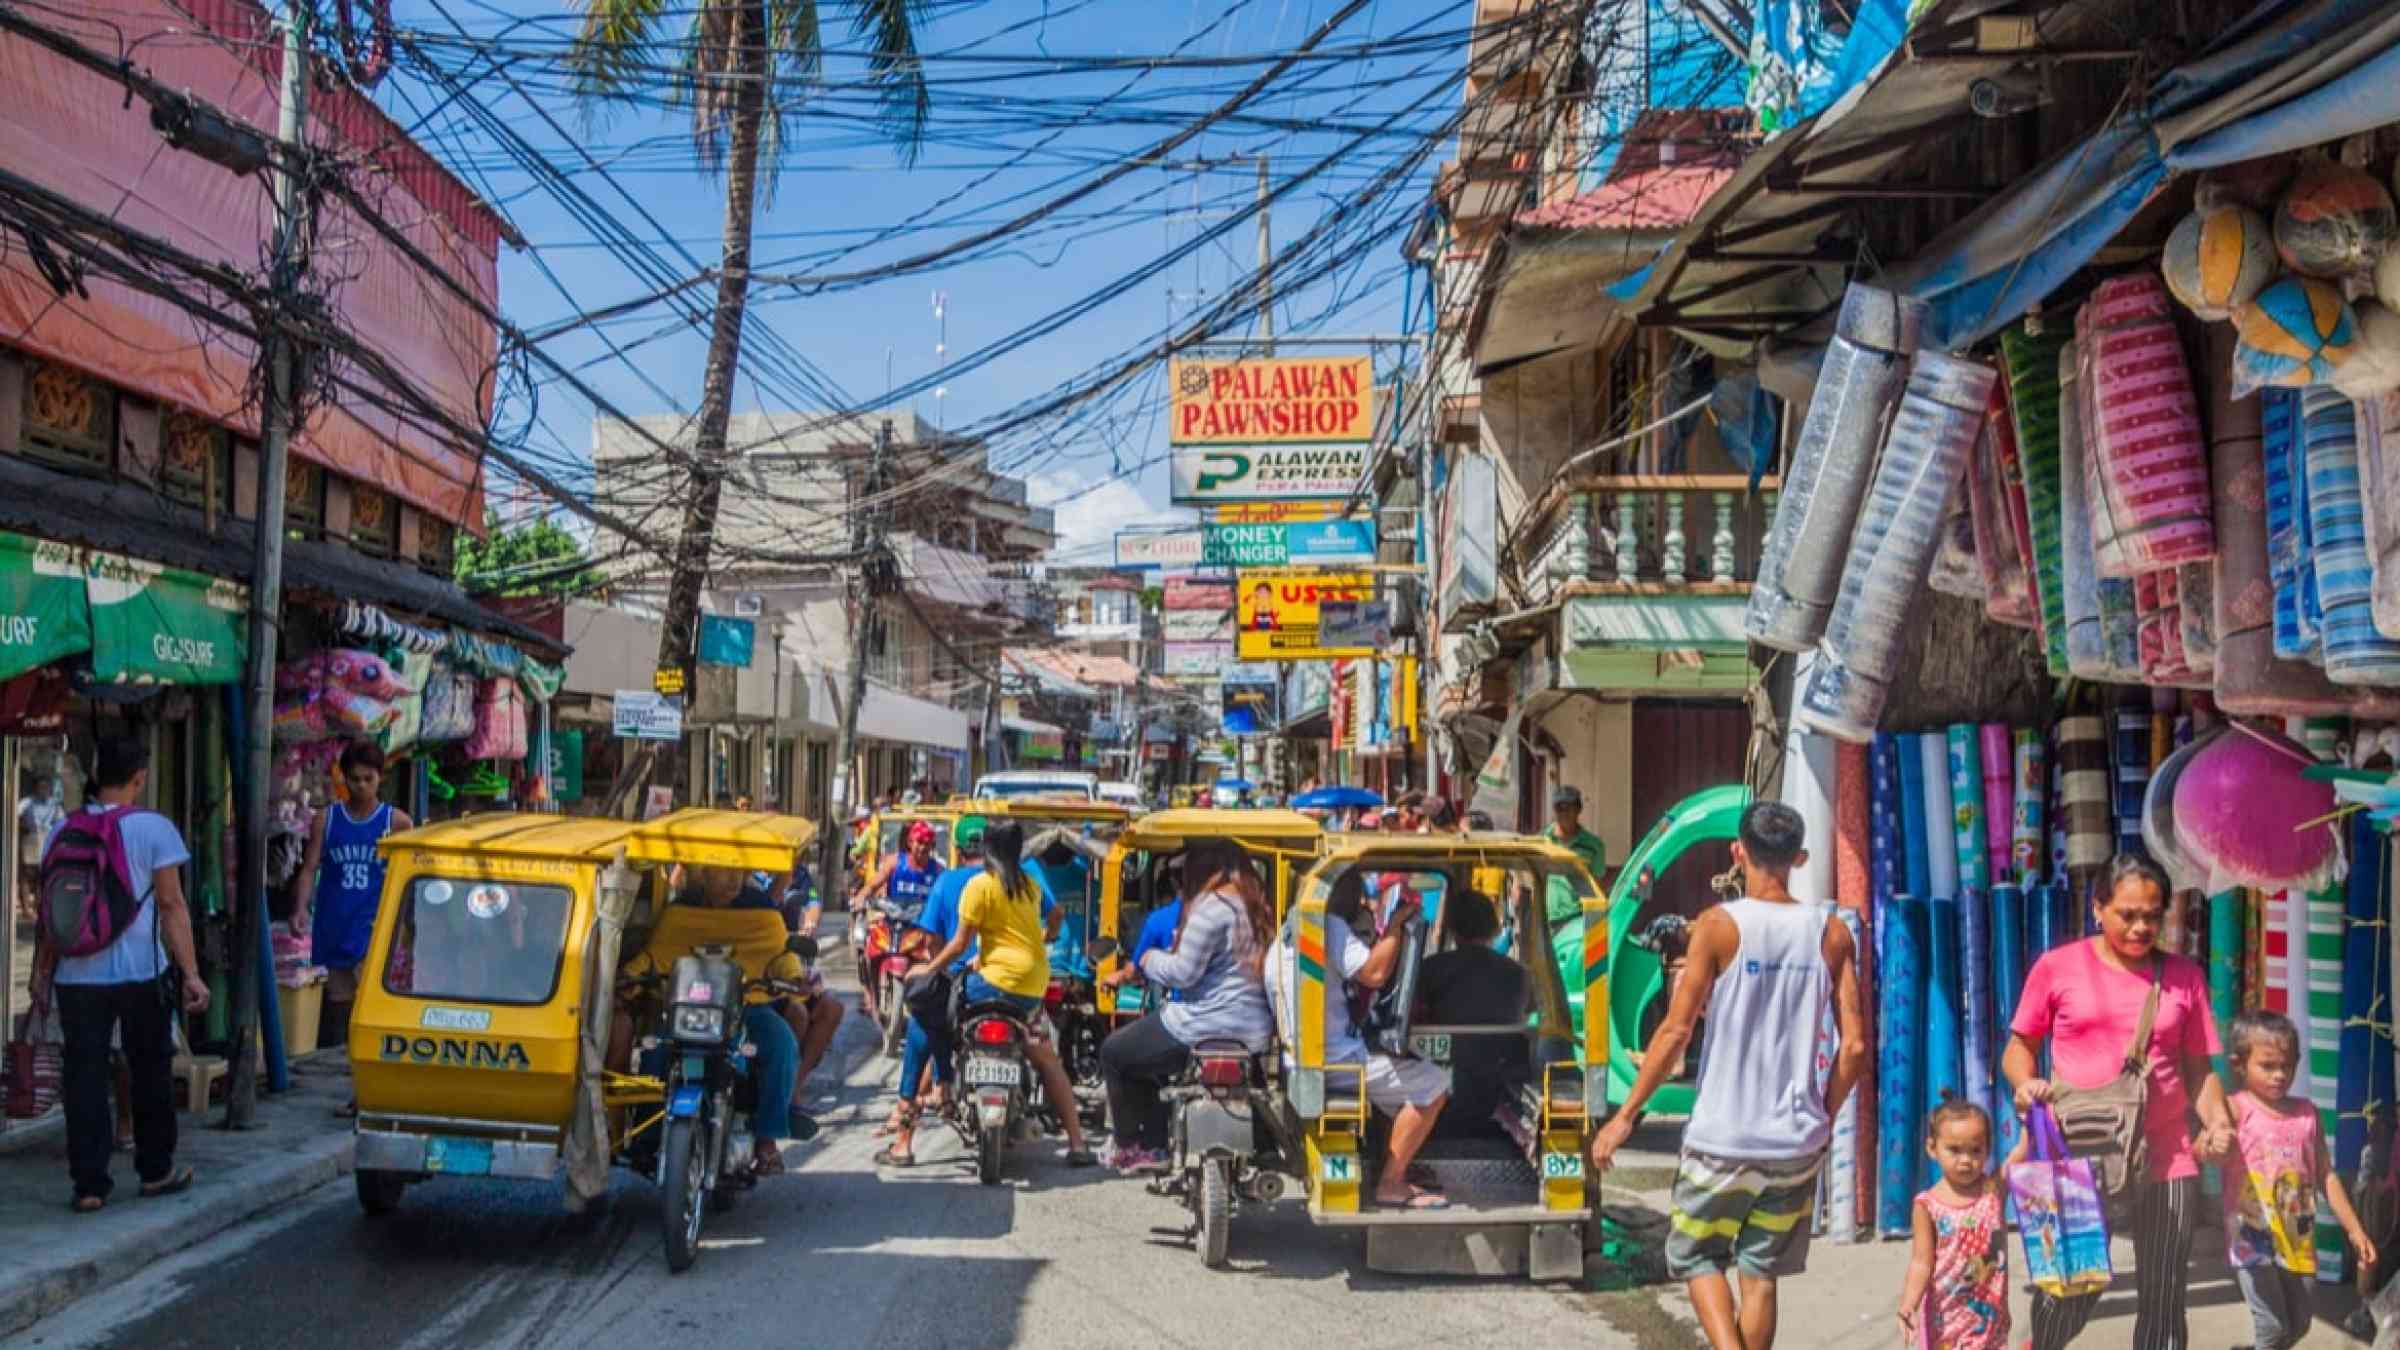 Traffic in a street of Boracay, Philippines (2018)